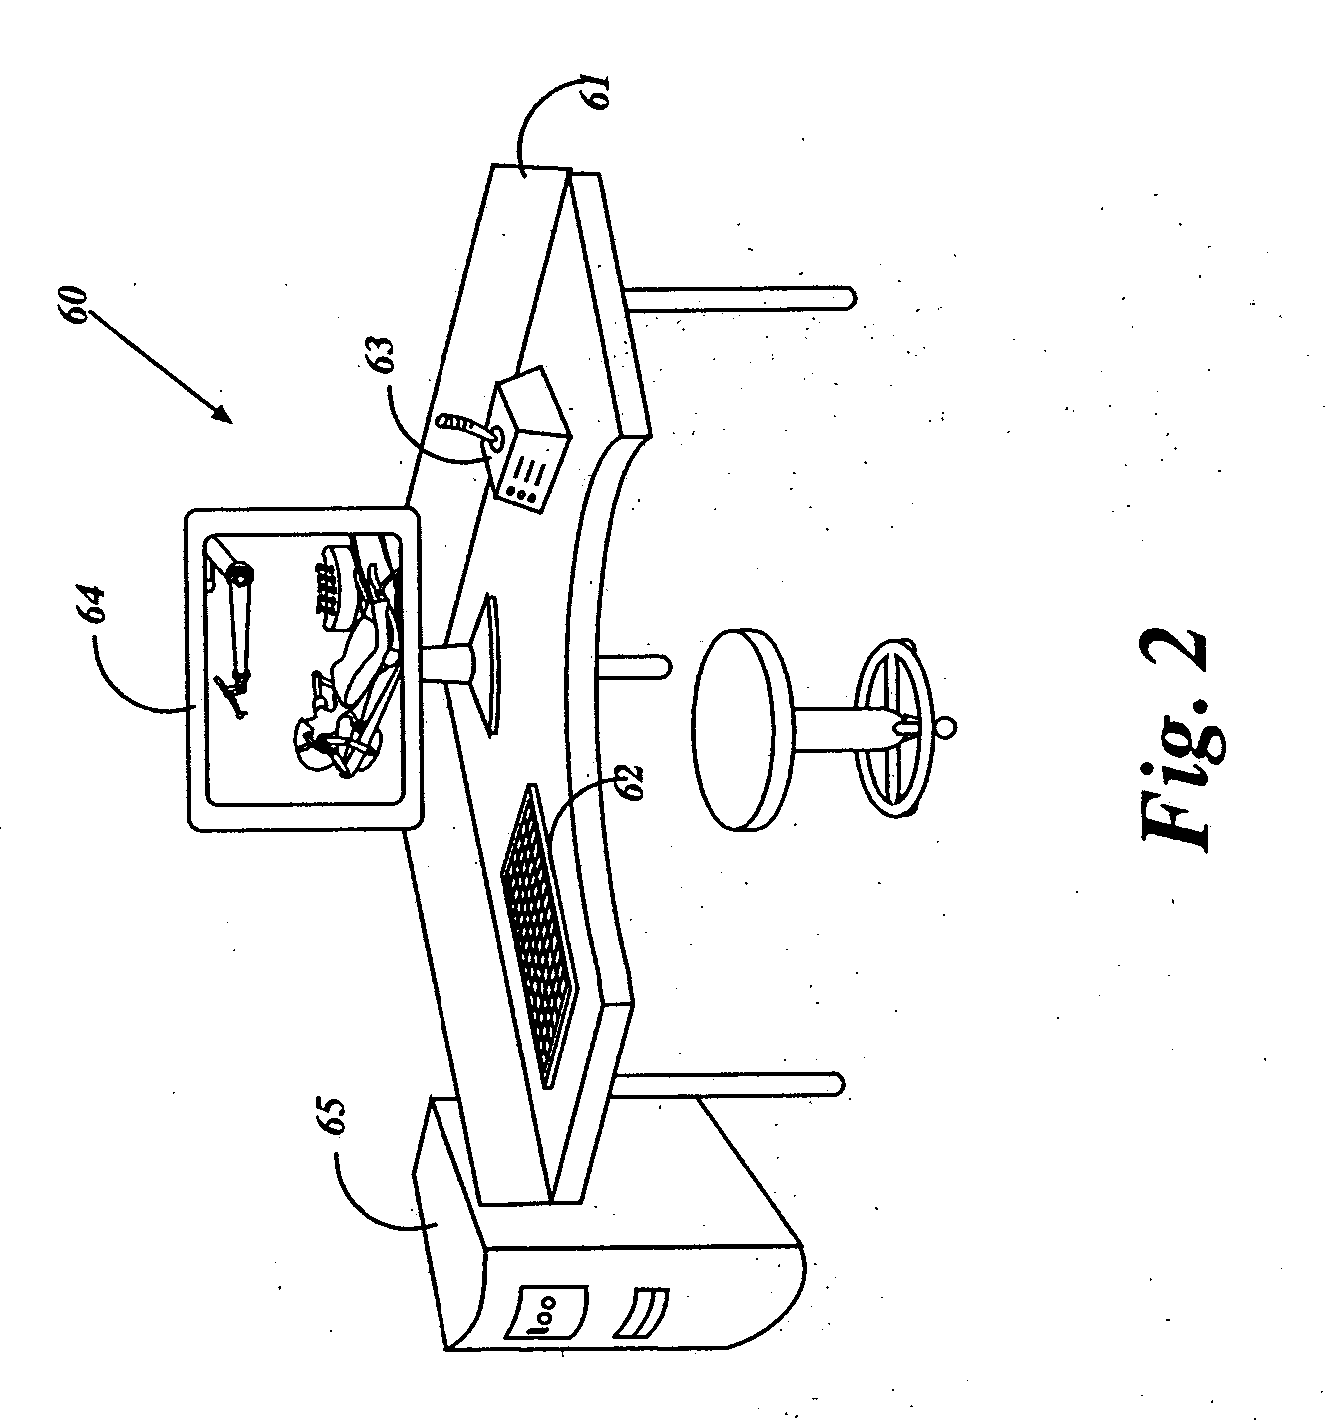 Computer-controlled dental treatment system and method